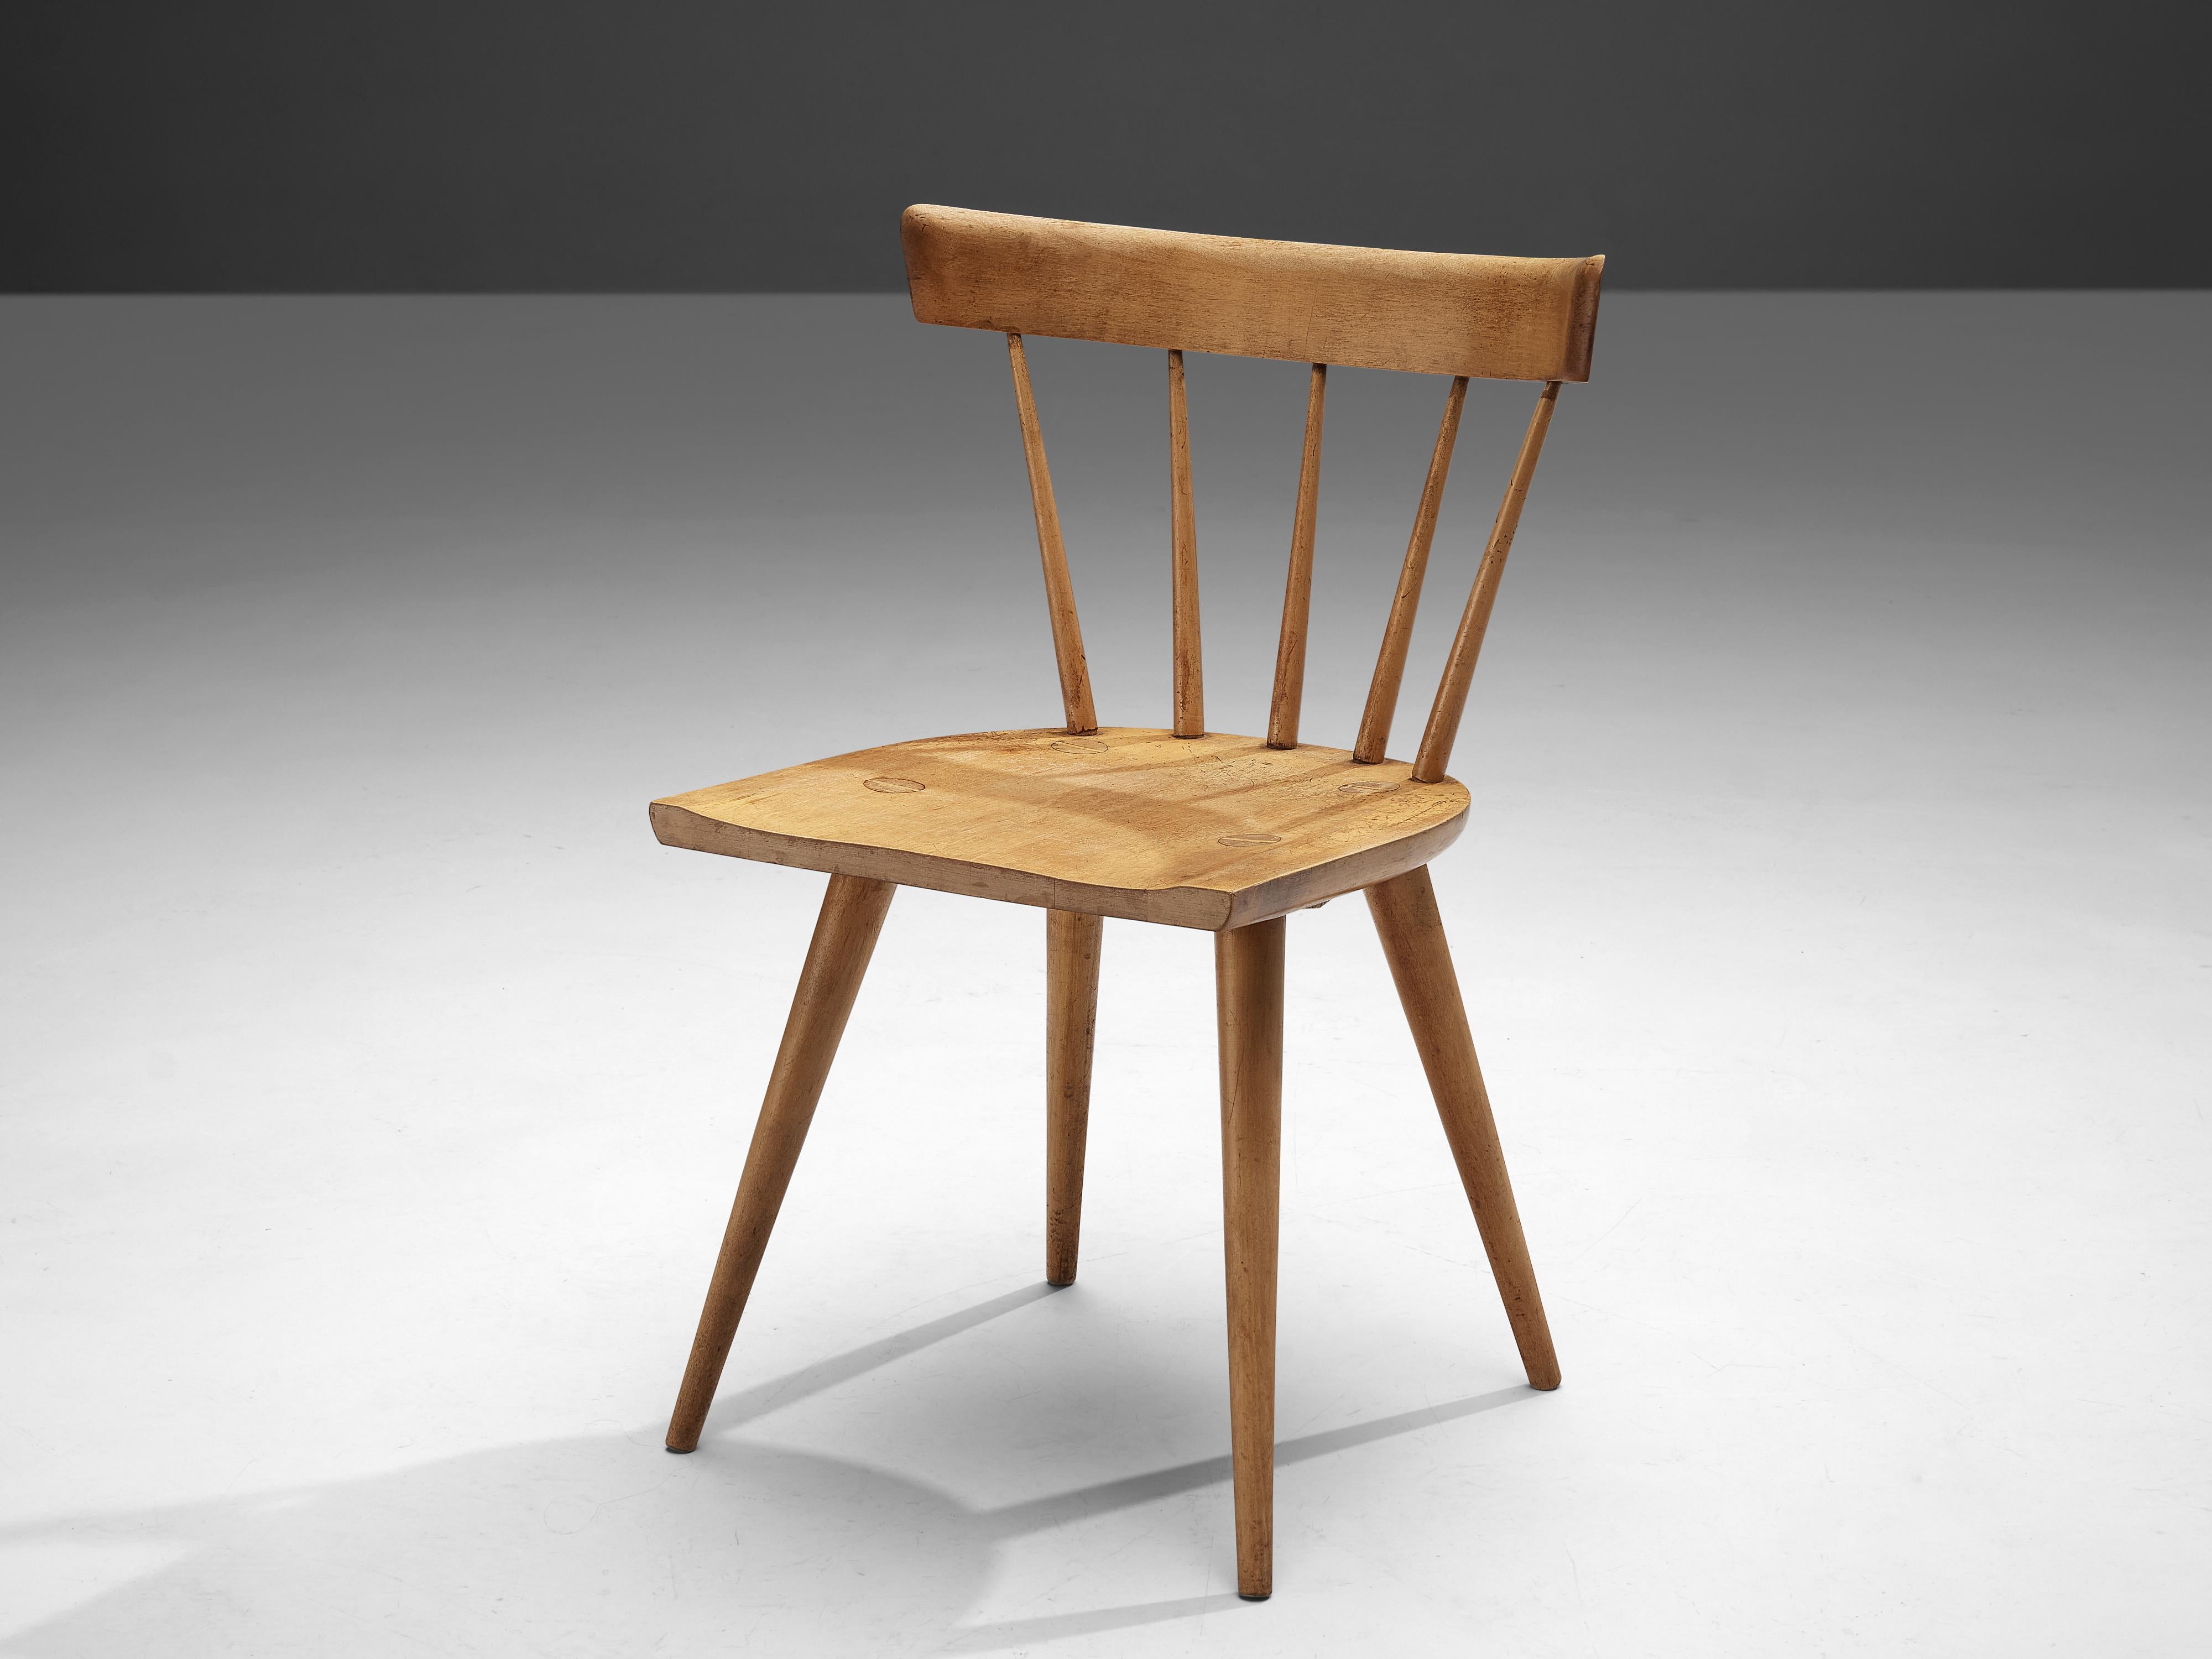 Paul McCobb, side chair, birch, United States, 1950s

Beautifully patinated Paul McCobb side chair. This well-composed chair combines aesthetics with comfort. A curved backrest held by thin spindles supports the sitter's back. A comfortably carved